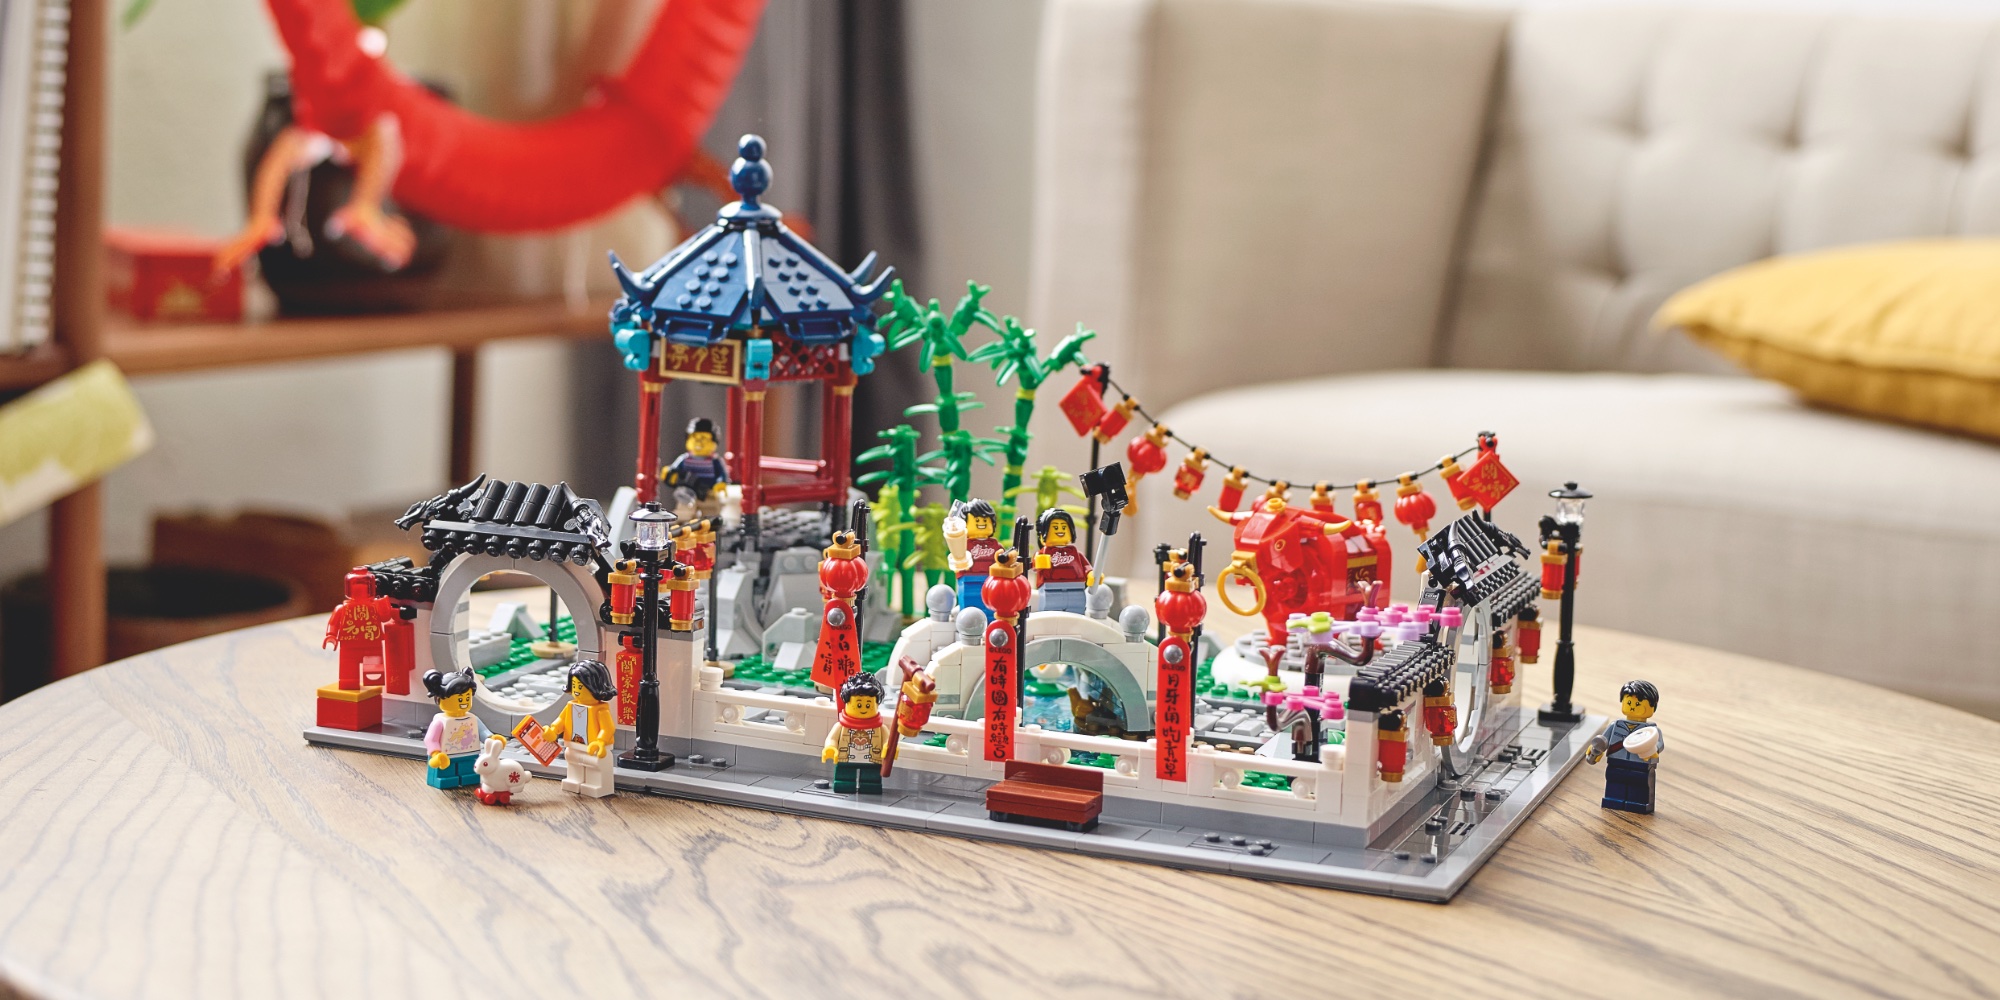 LEGO New Year kits launch with 3 new builds in - 9to5Toys